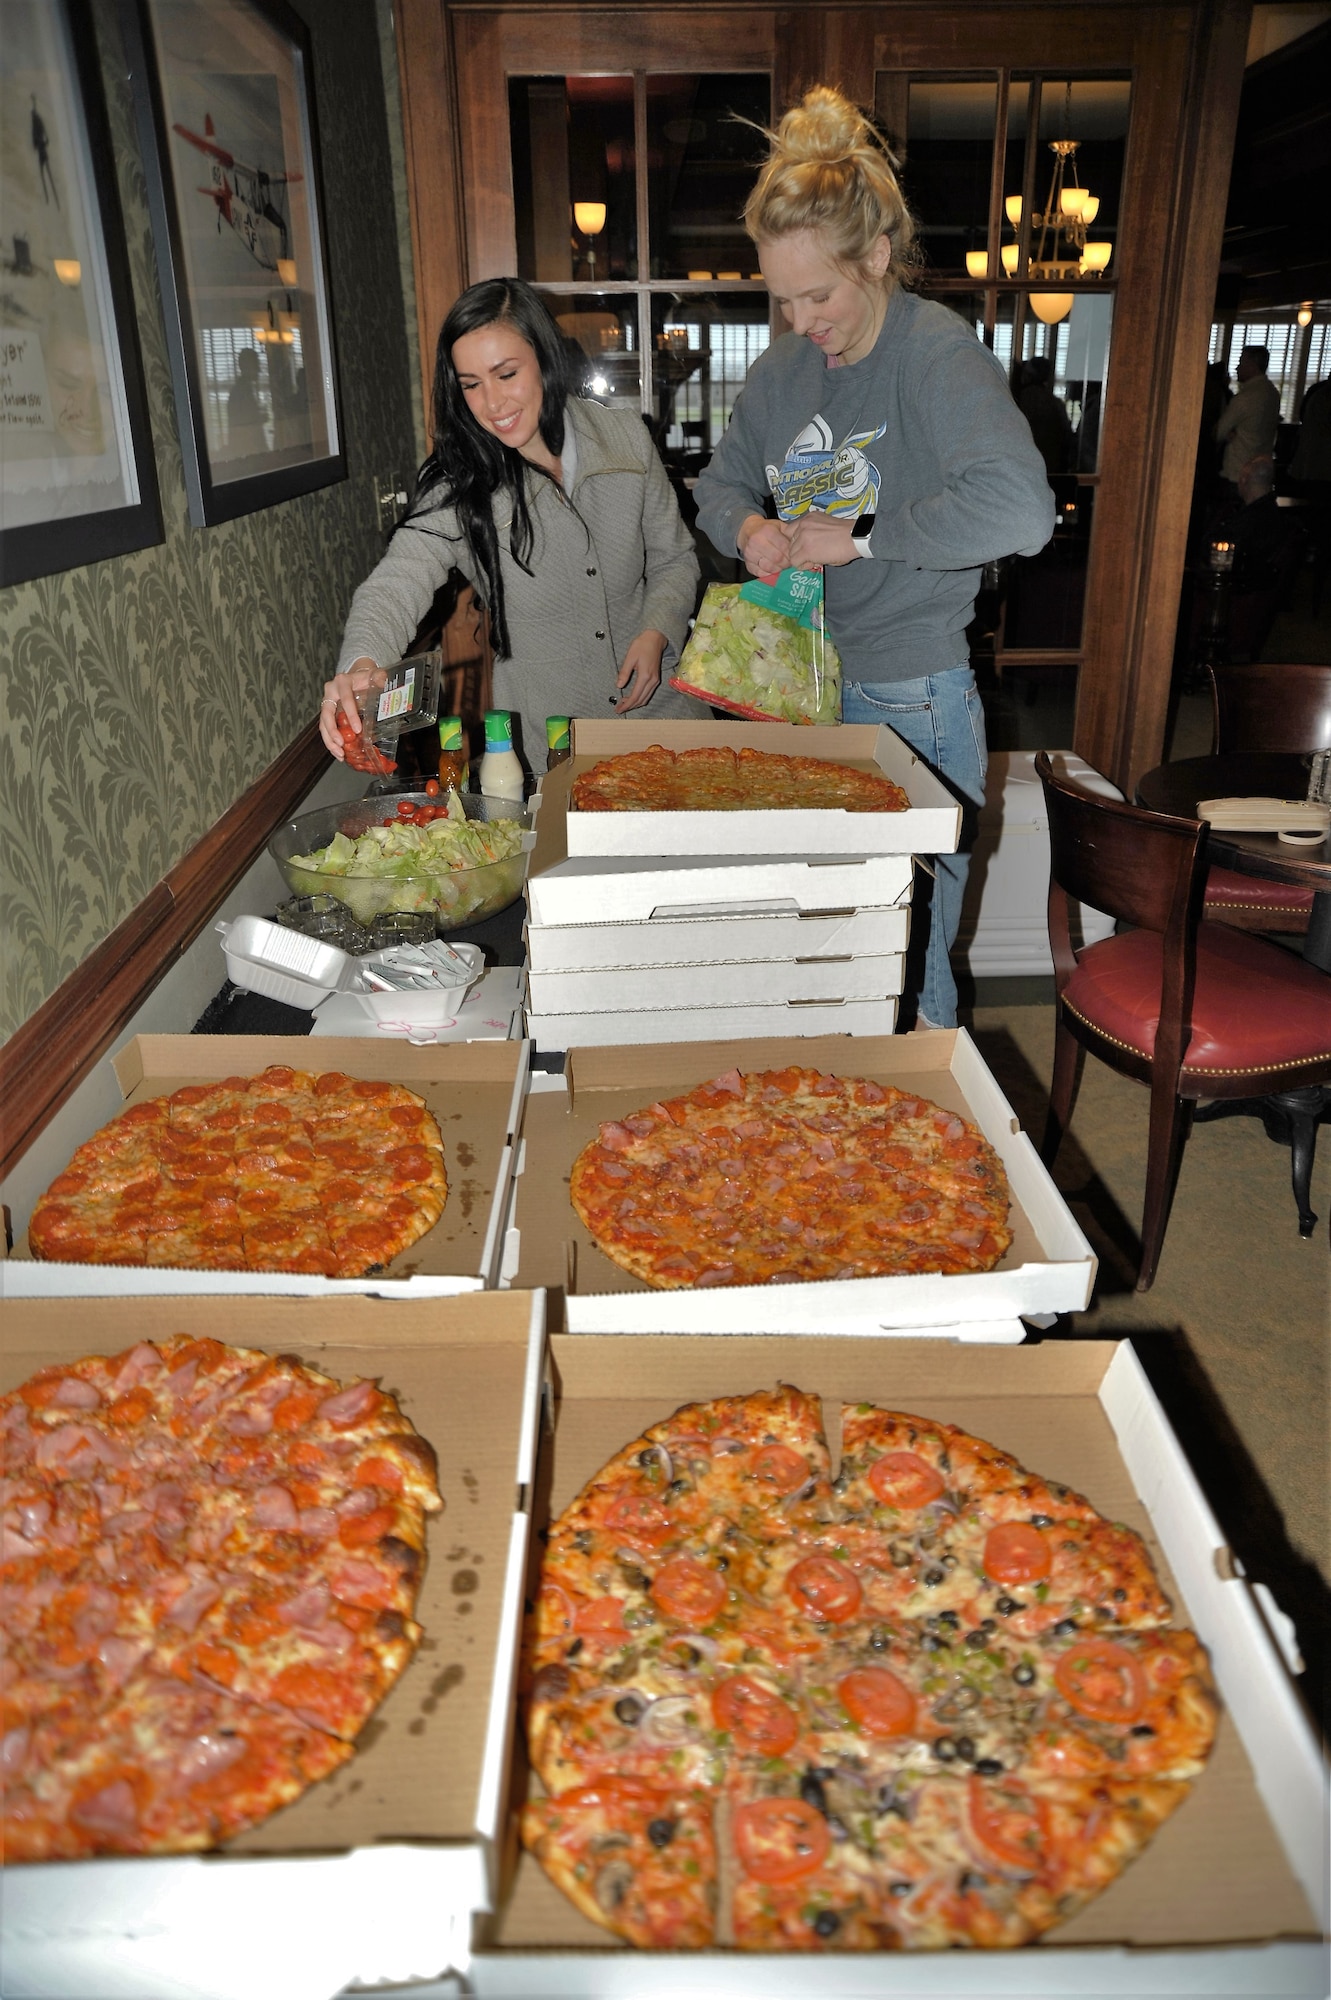 Second Lieutenants Natalie Seitz and Silvia Seraly set up the food for the summit ice-breaker dinner held March 4 in Fredericksburg. The lieutenants are remotely piloted aircraft students assigned to the 340th FTG while they wait for their class start date. (U.S. Air Force photo)